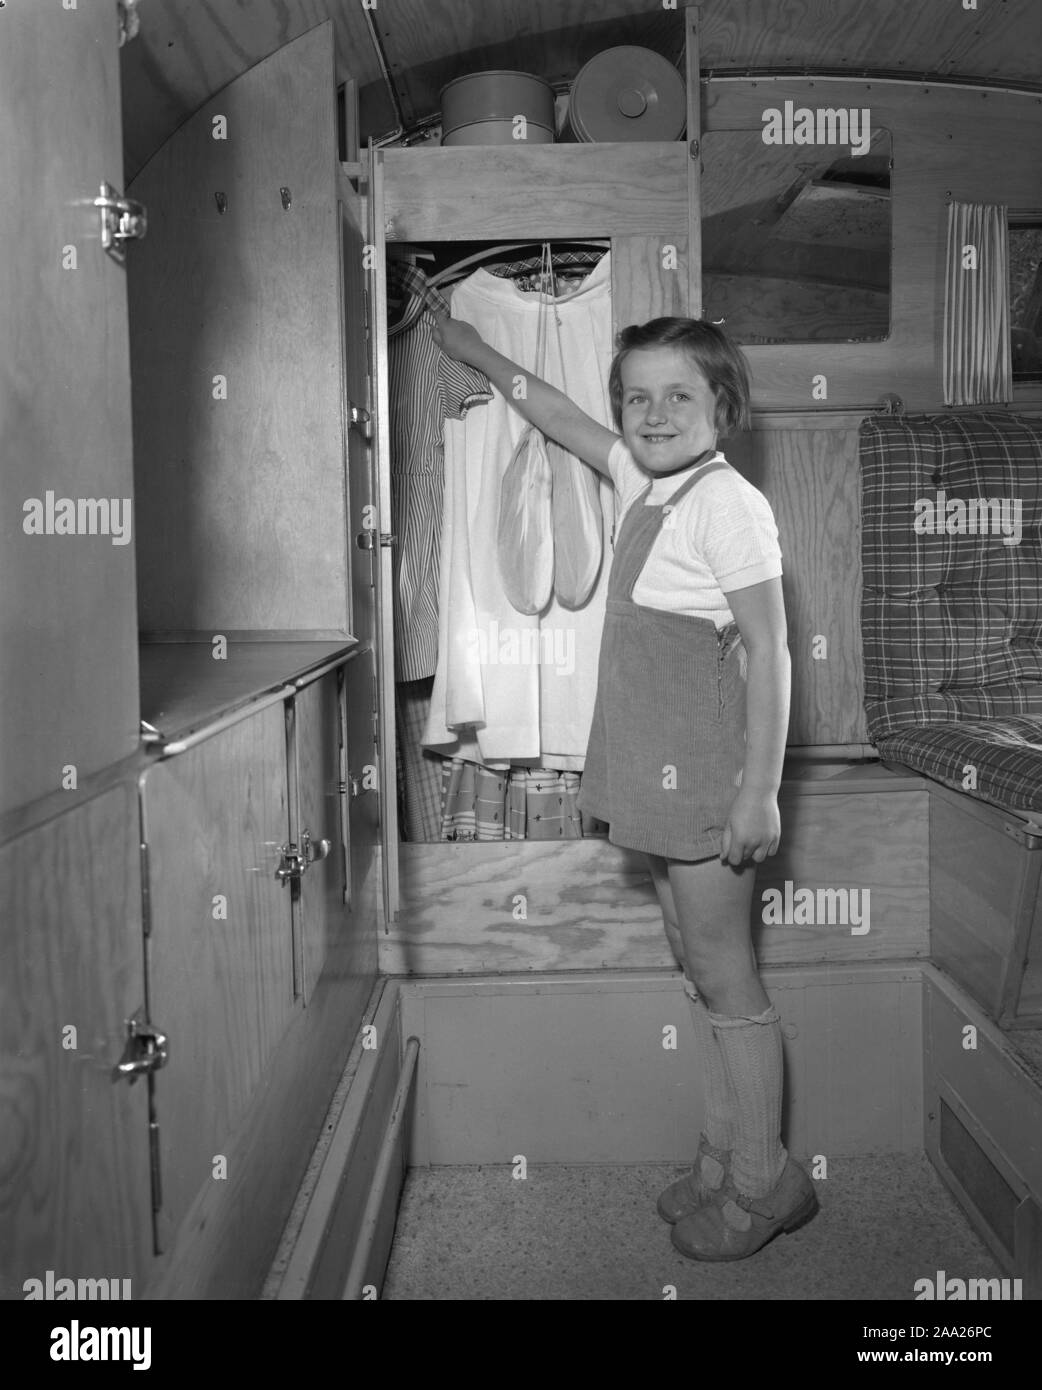 1950s camping. A family is enjoying their holiday and the practial camping life in their caravan. Demonstrating how well everything works for them even on holiday. The daughter in the family demonstrates the practical closet where clothes and other items are stored away. Sweden 1952 Ref 2021 Stock Photo